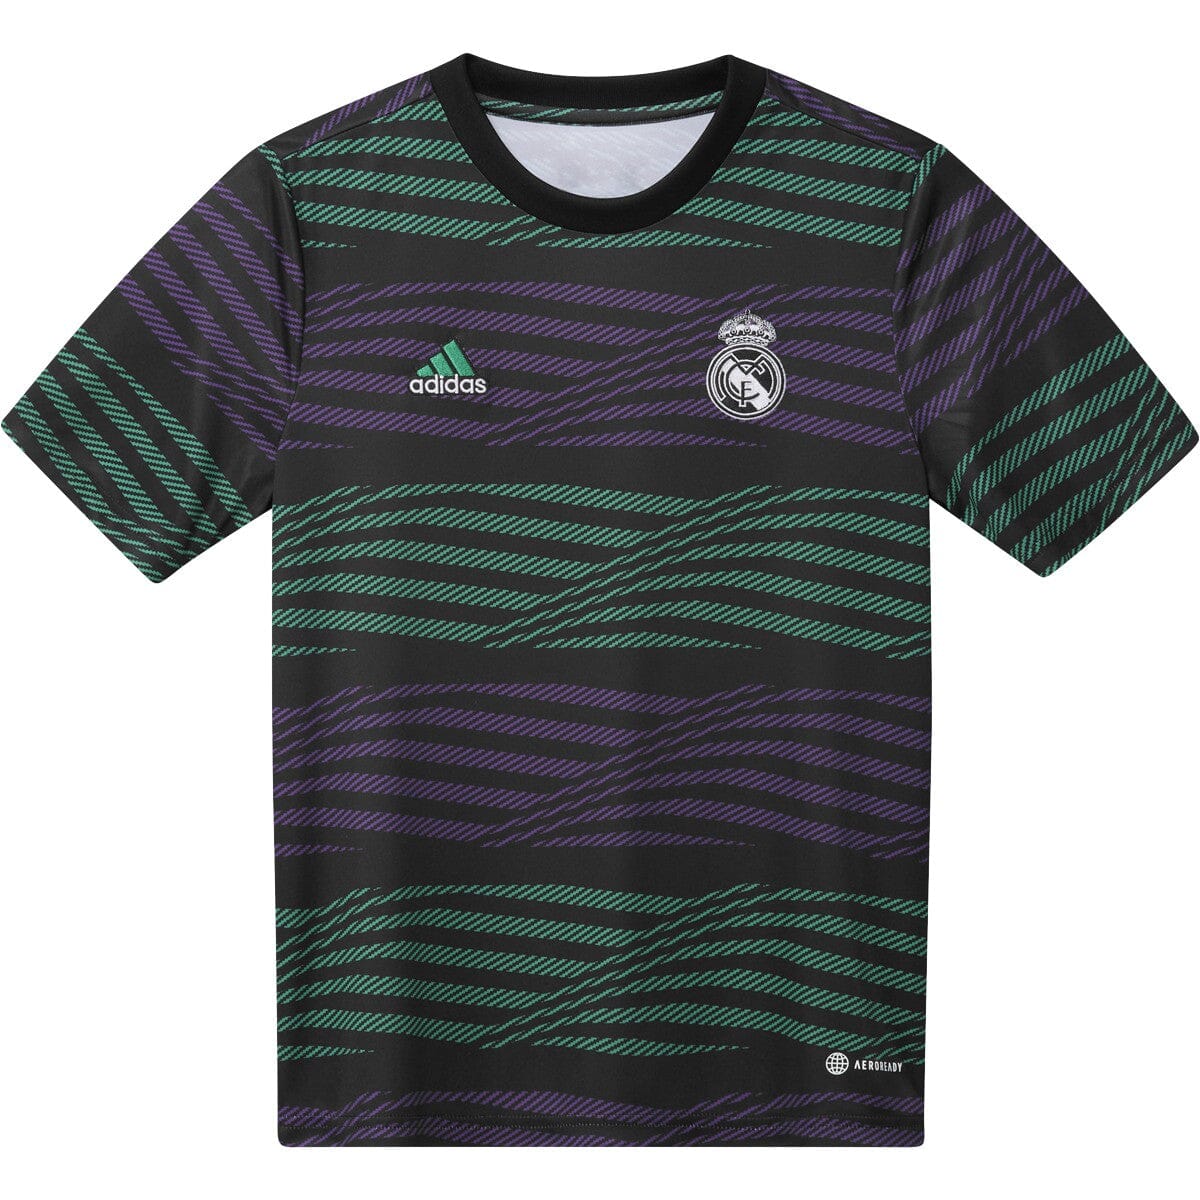 adidas Youth Real Madrid 22/23 Pre-Match Jersey | HT8797 Jersey Adidas Youth Medium Black / Active Purple / Court Green 